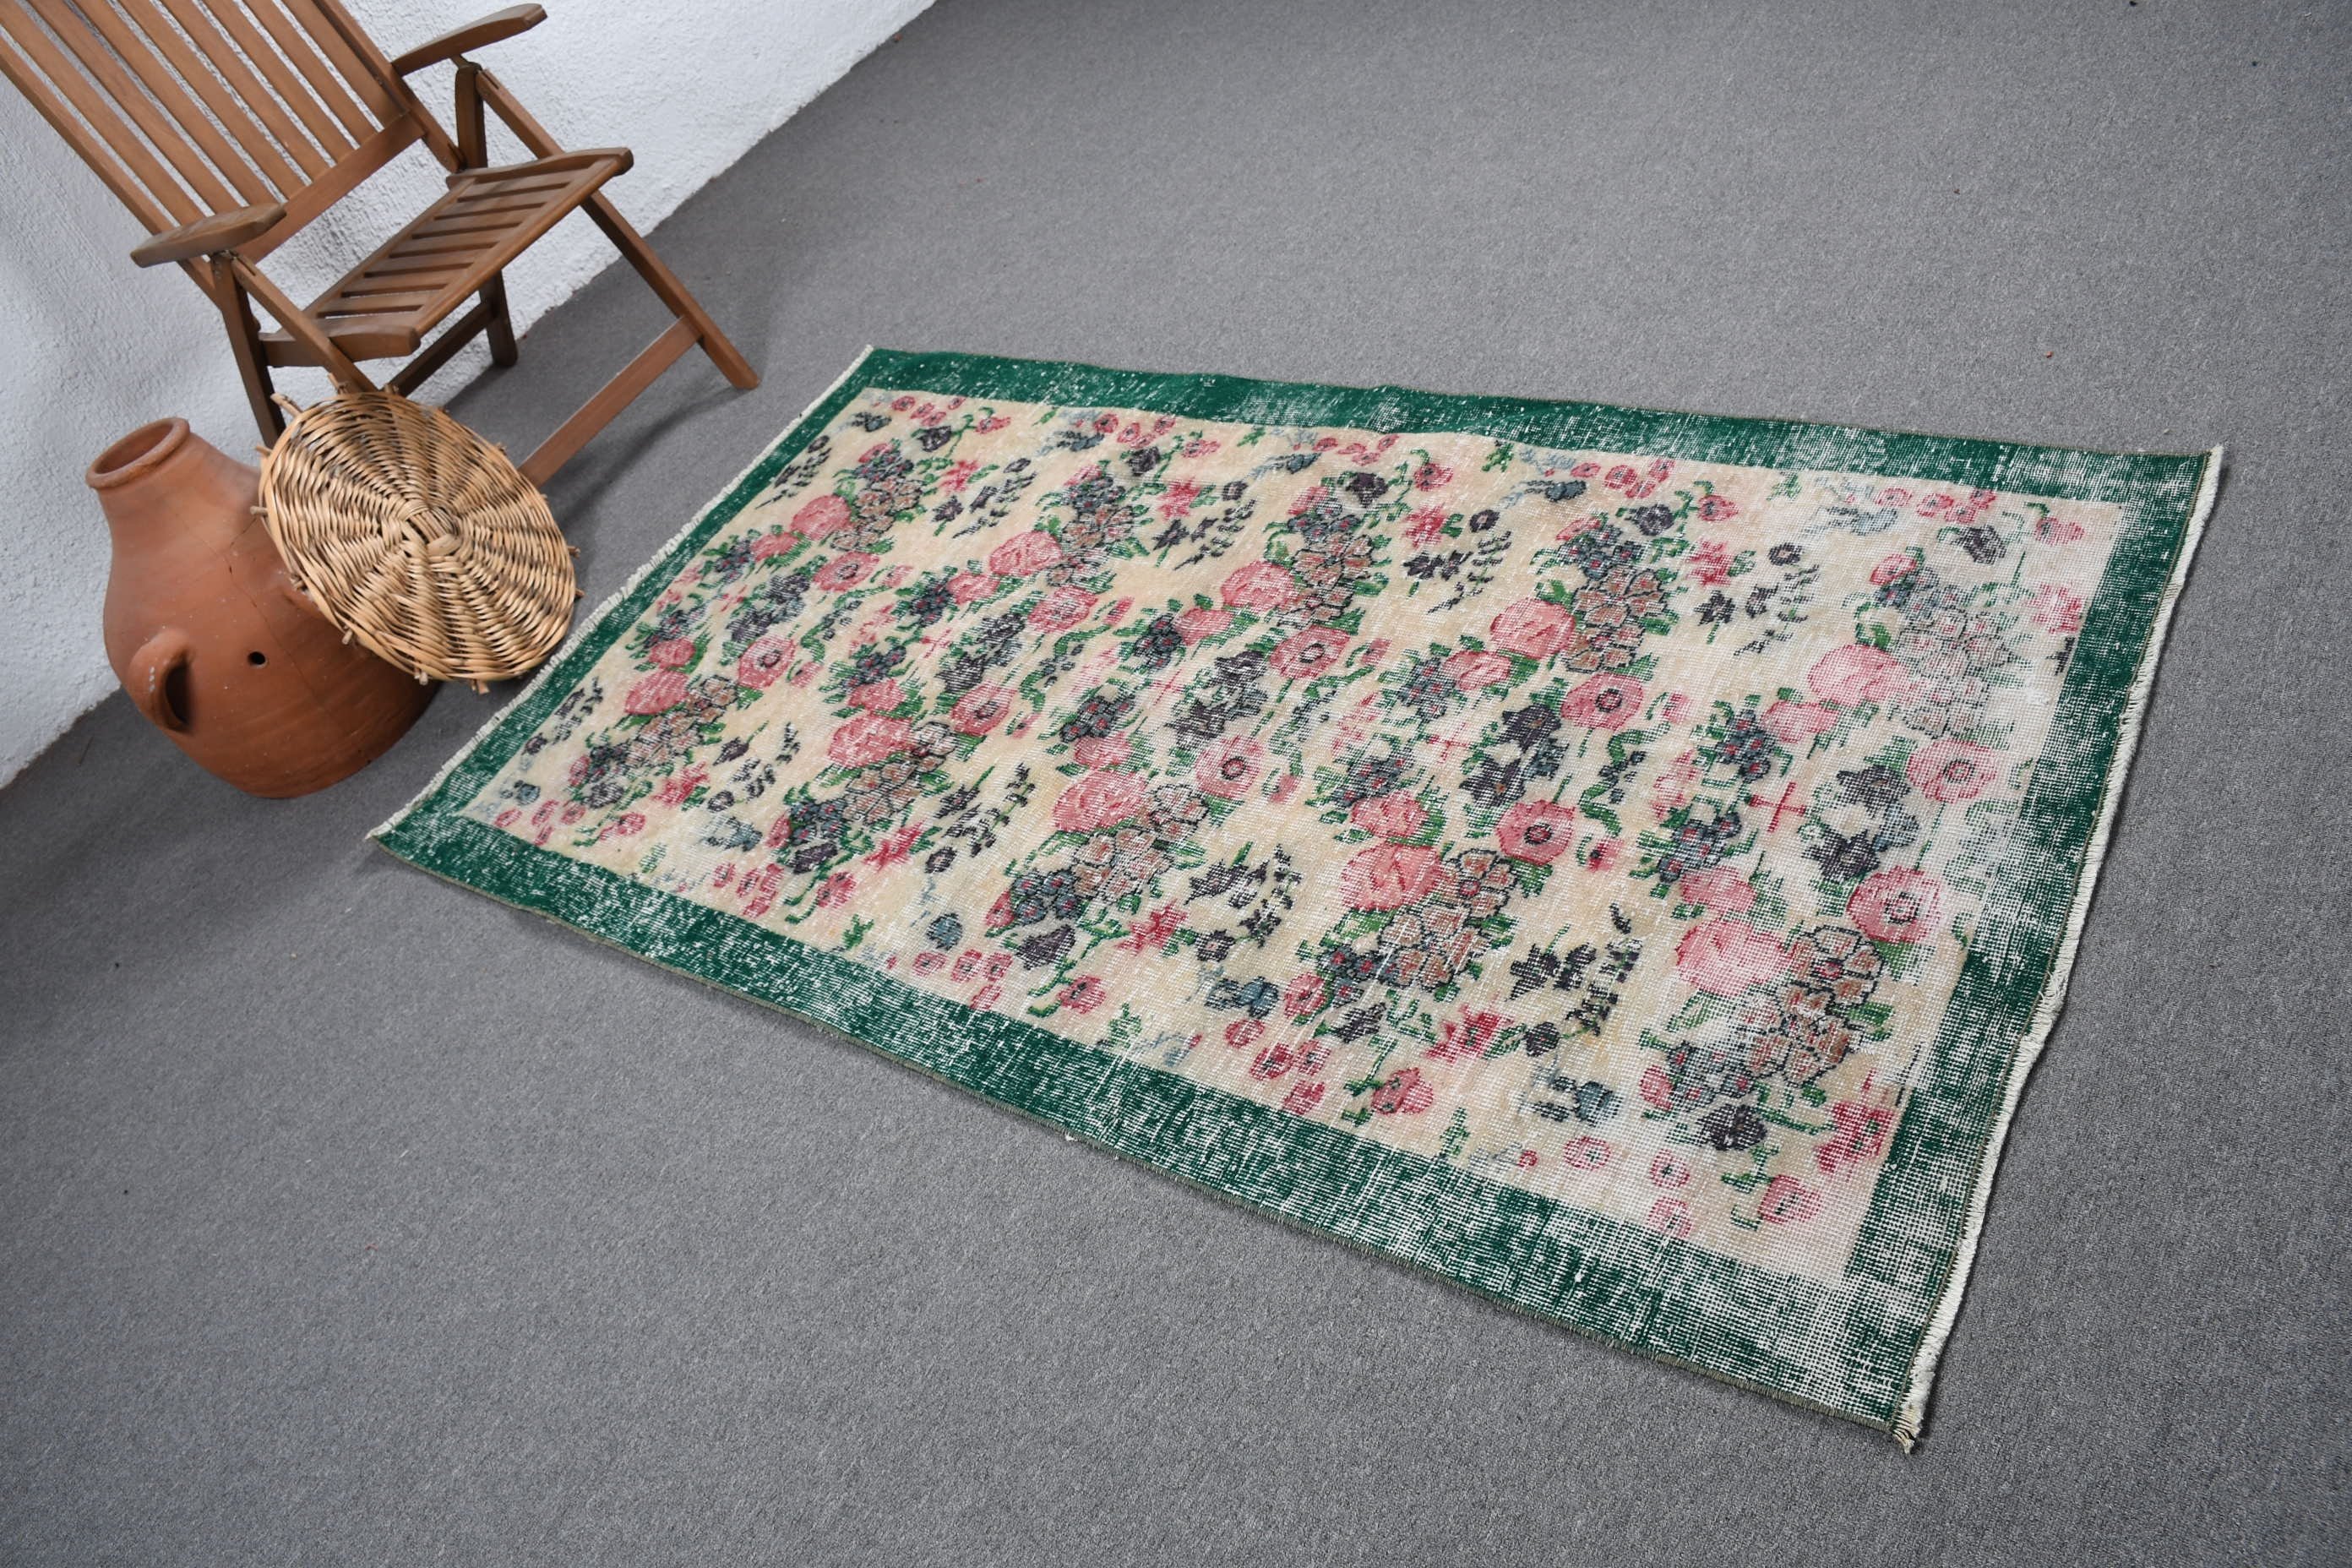 Turkish Rug, Entry Rugs, Designer Rugs, 3.7x6.4 ft Accent Rugs, Green Home Decor Rugs, Floor Rug, Vintage Rug, Kitchen Rug